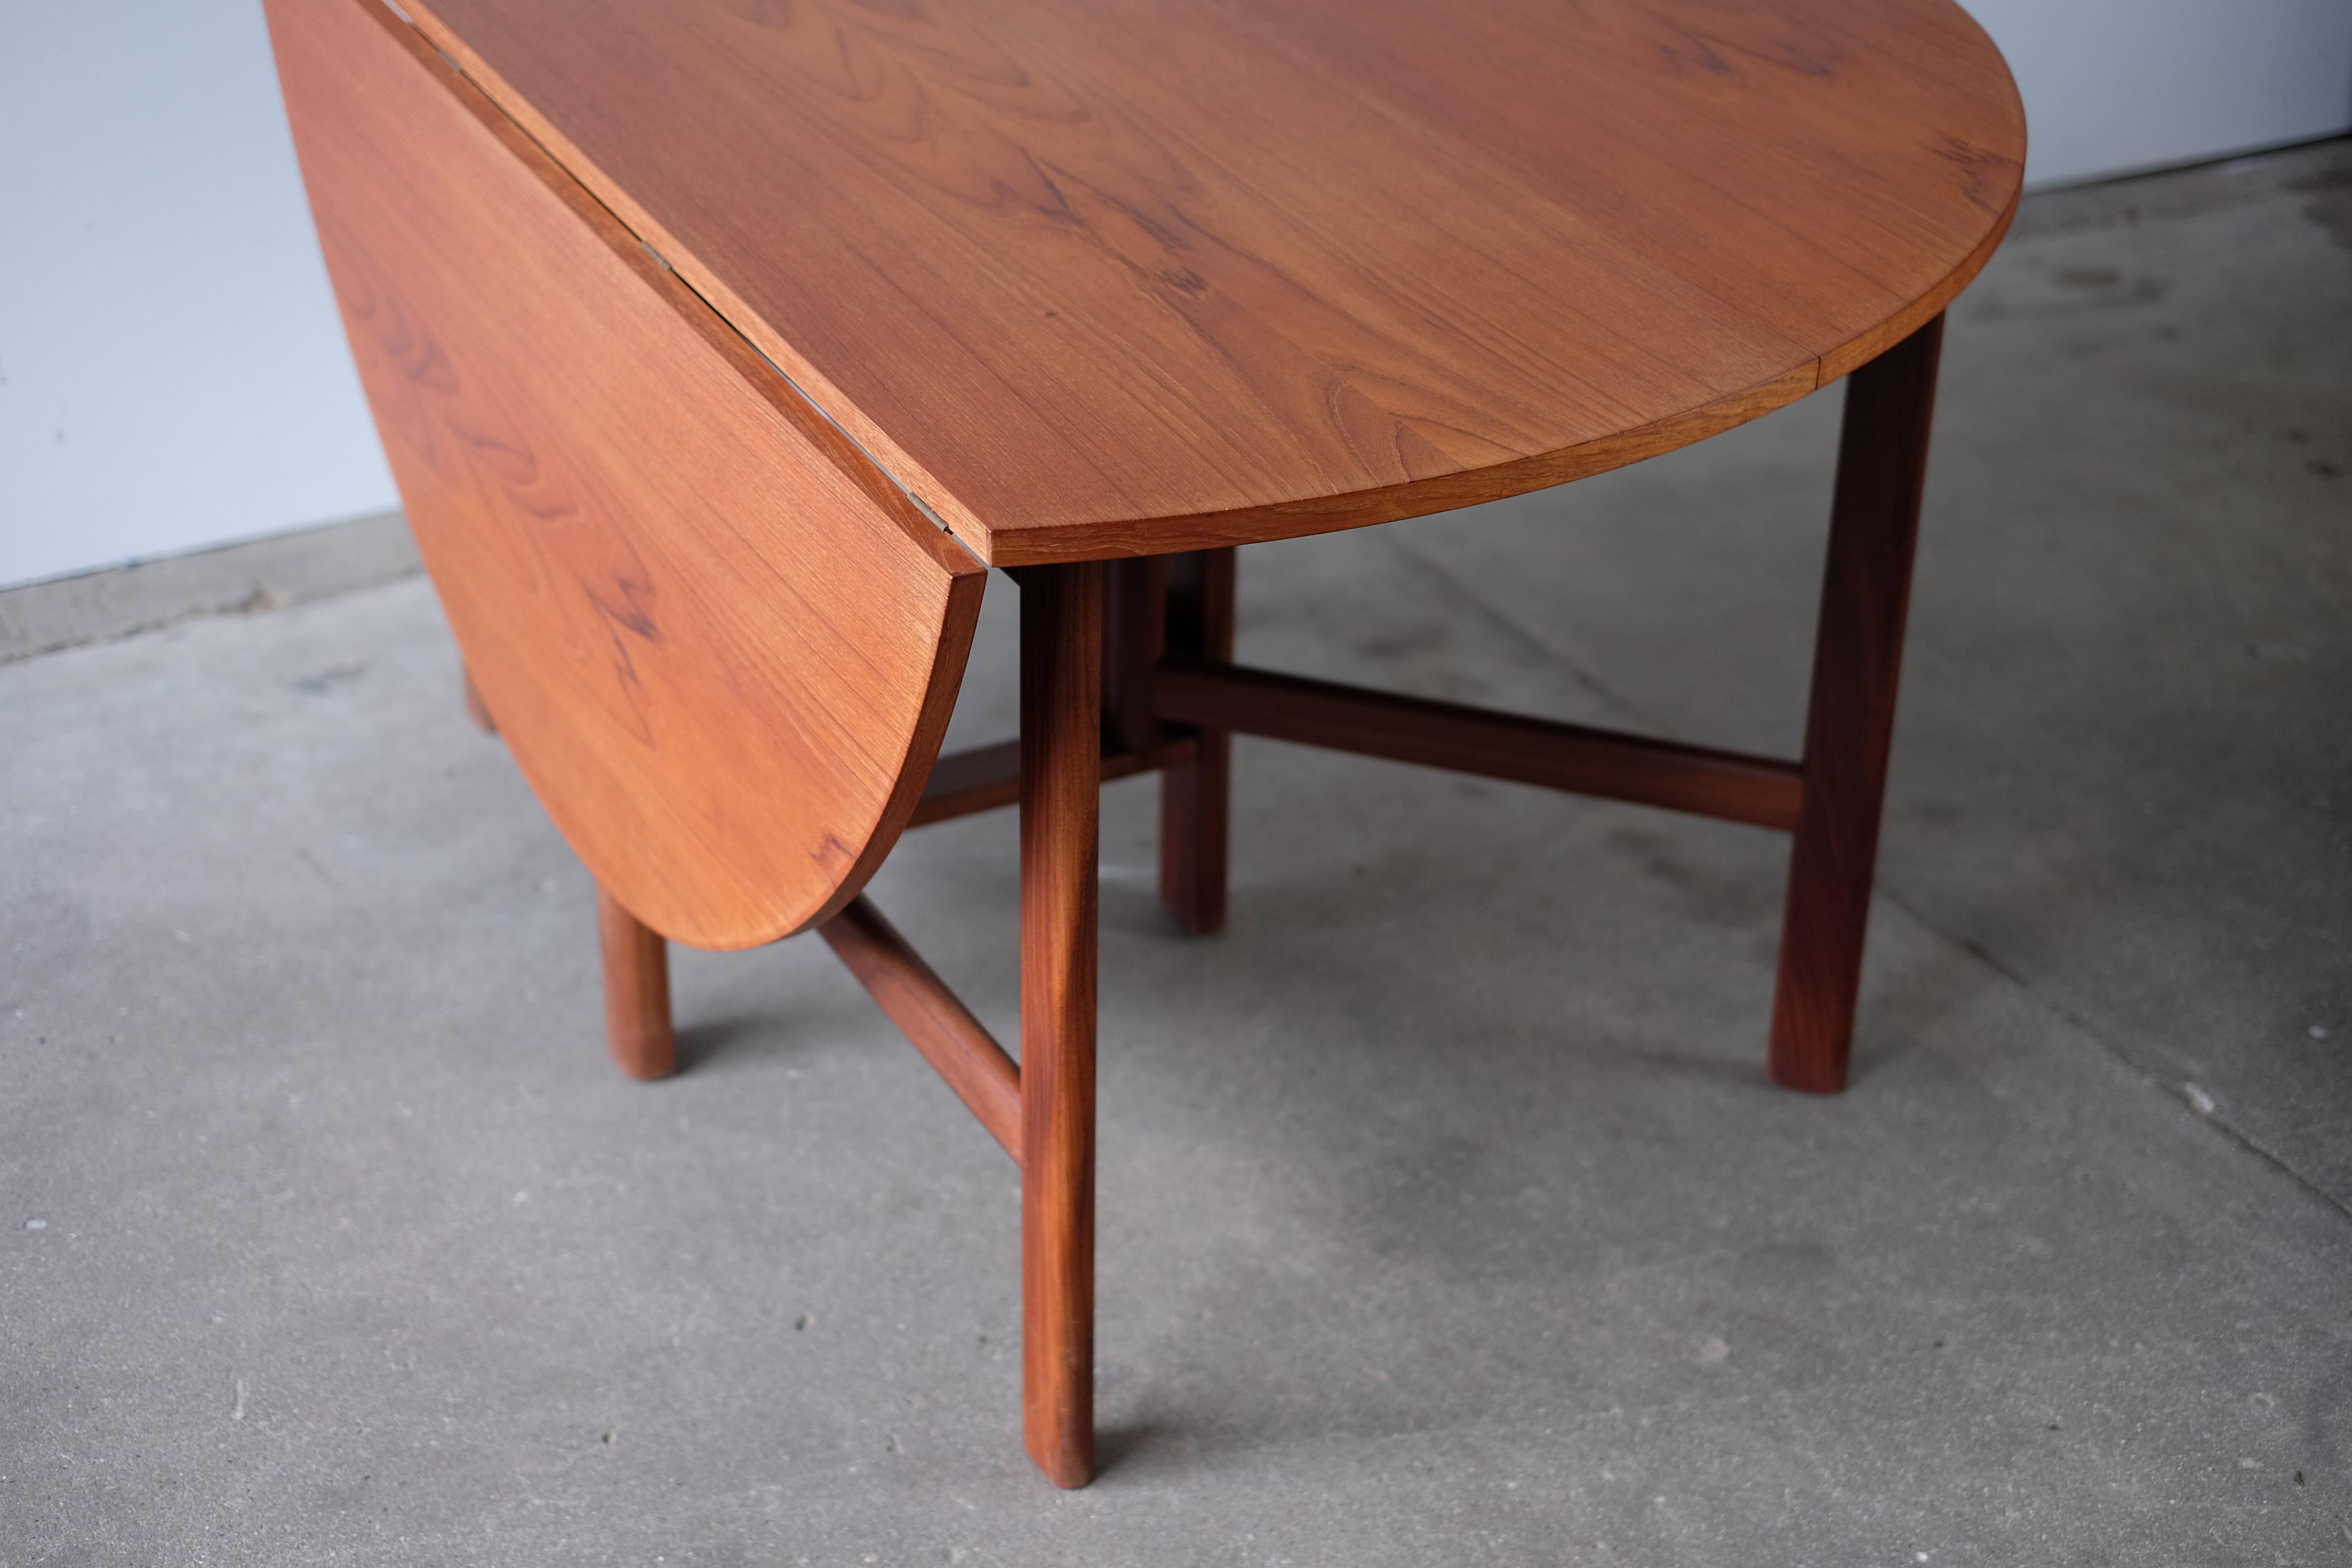 Mid-20th Century Stunning Rarely Seen Dining Table in Teak, Danish Design For Sale